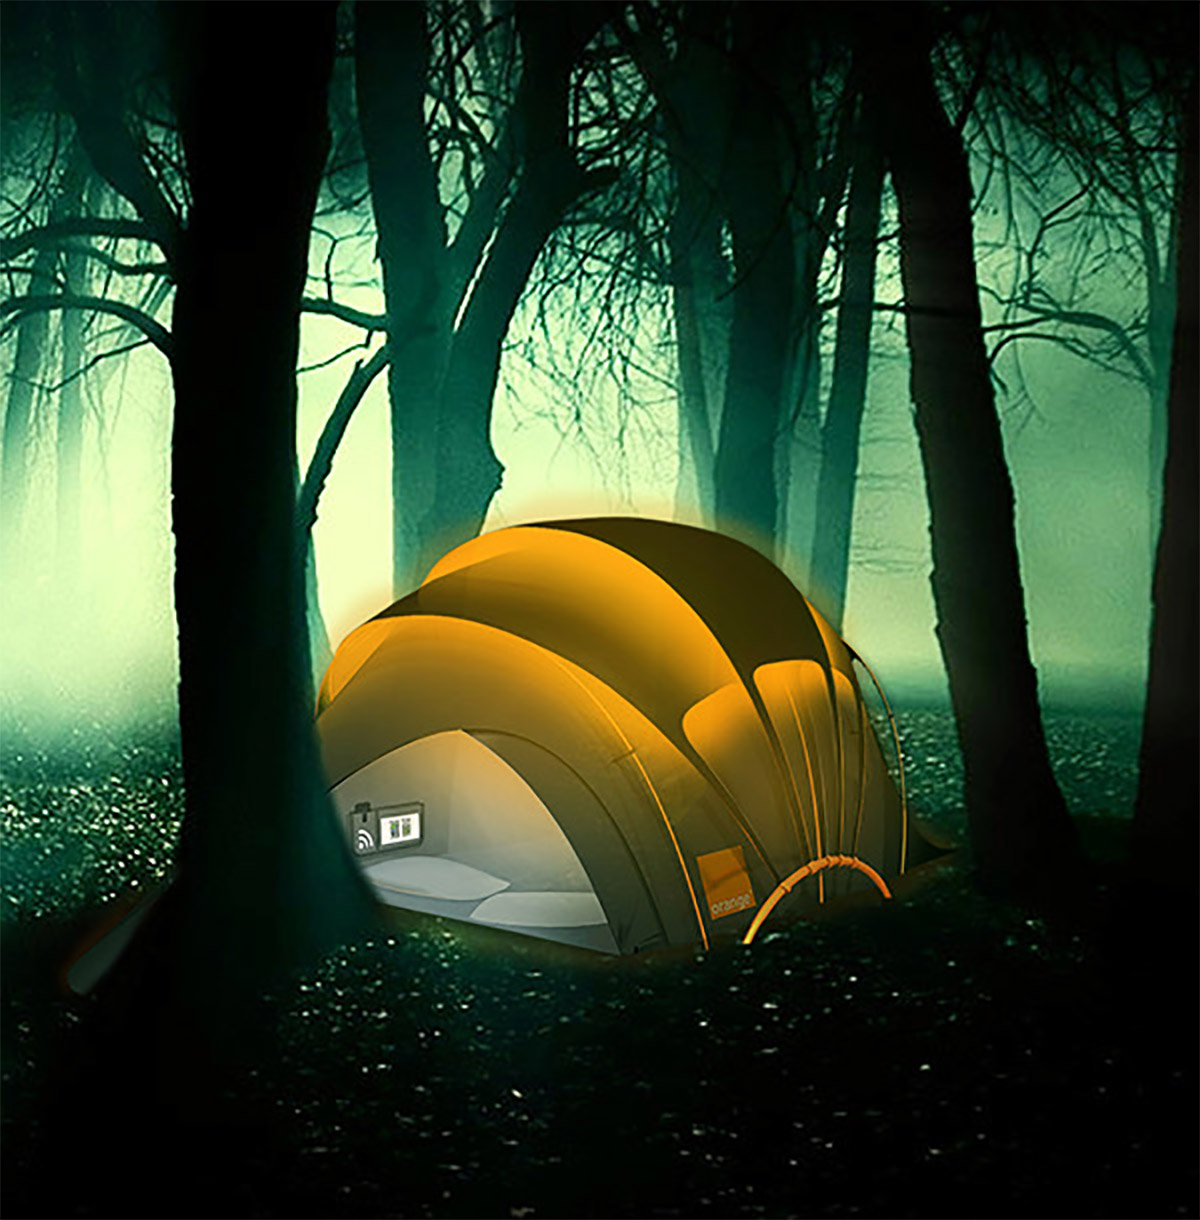 Woestijn Millimeter een keer This Solar Tent Has Heated Floors, Wi-Fi, and It Illuminates at Night